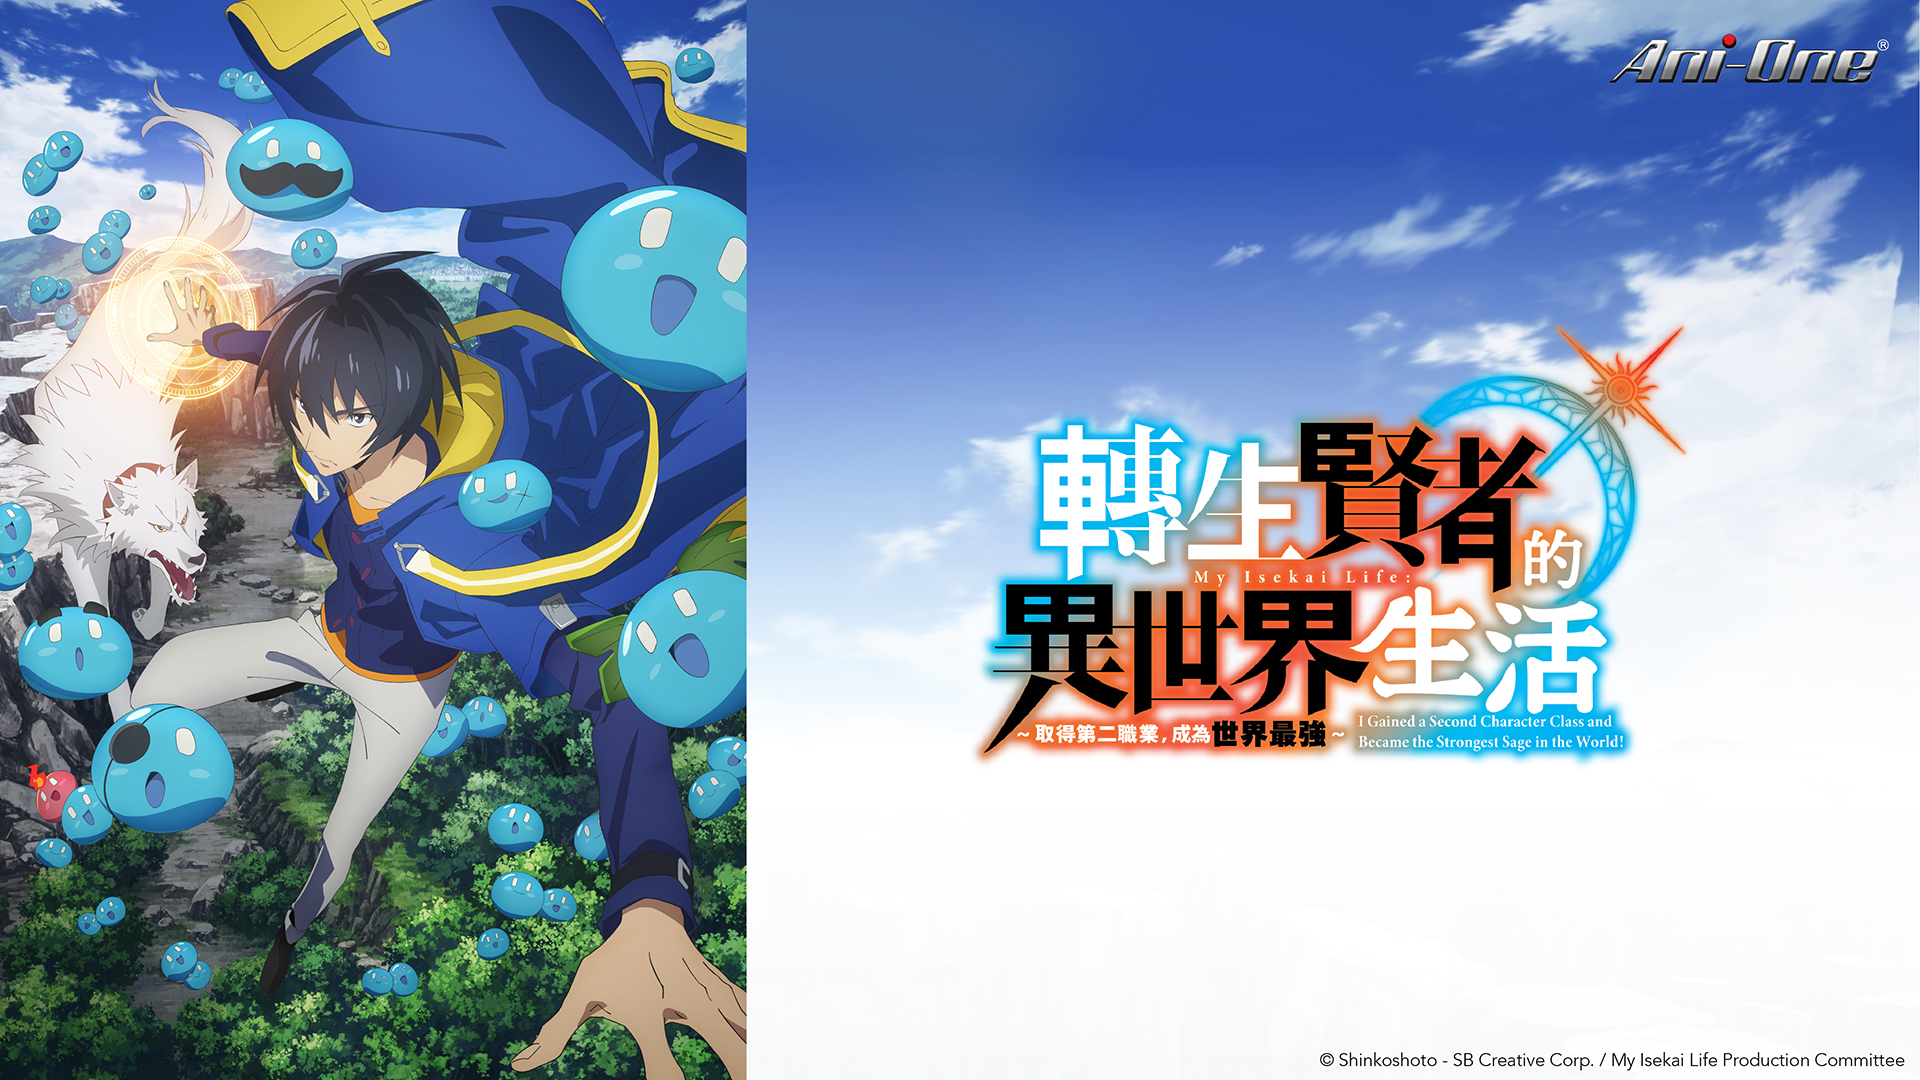 Sentai Filmworks Announces My Isekai Life: I Gained a Second Character  Class and Became the Strongest Sage in the World! Anime - Crunchyroll News